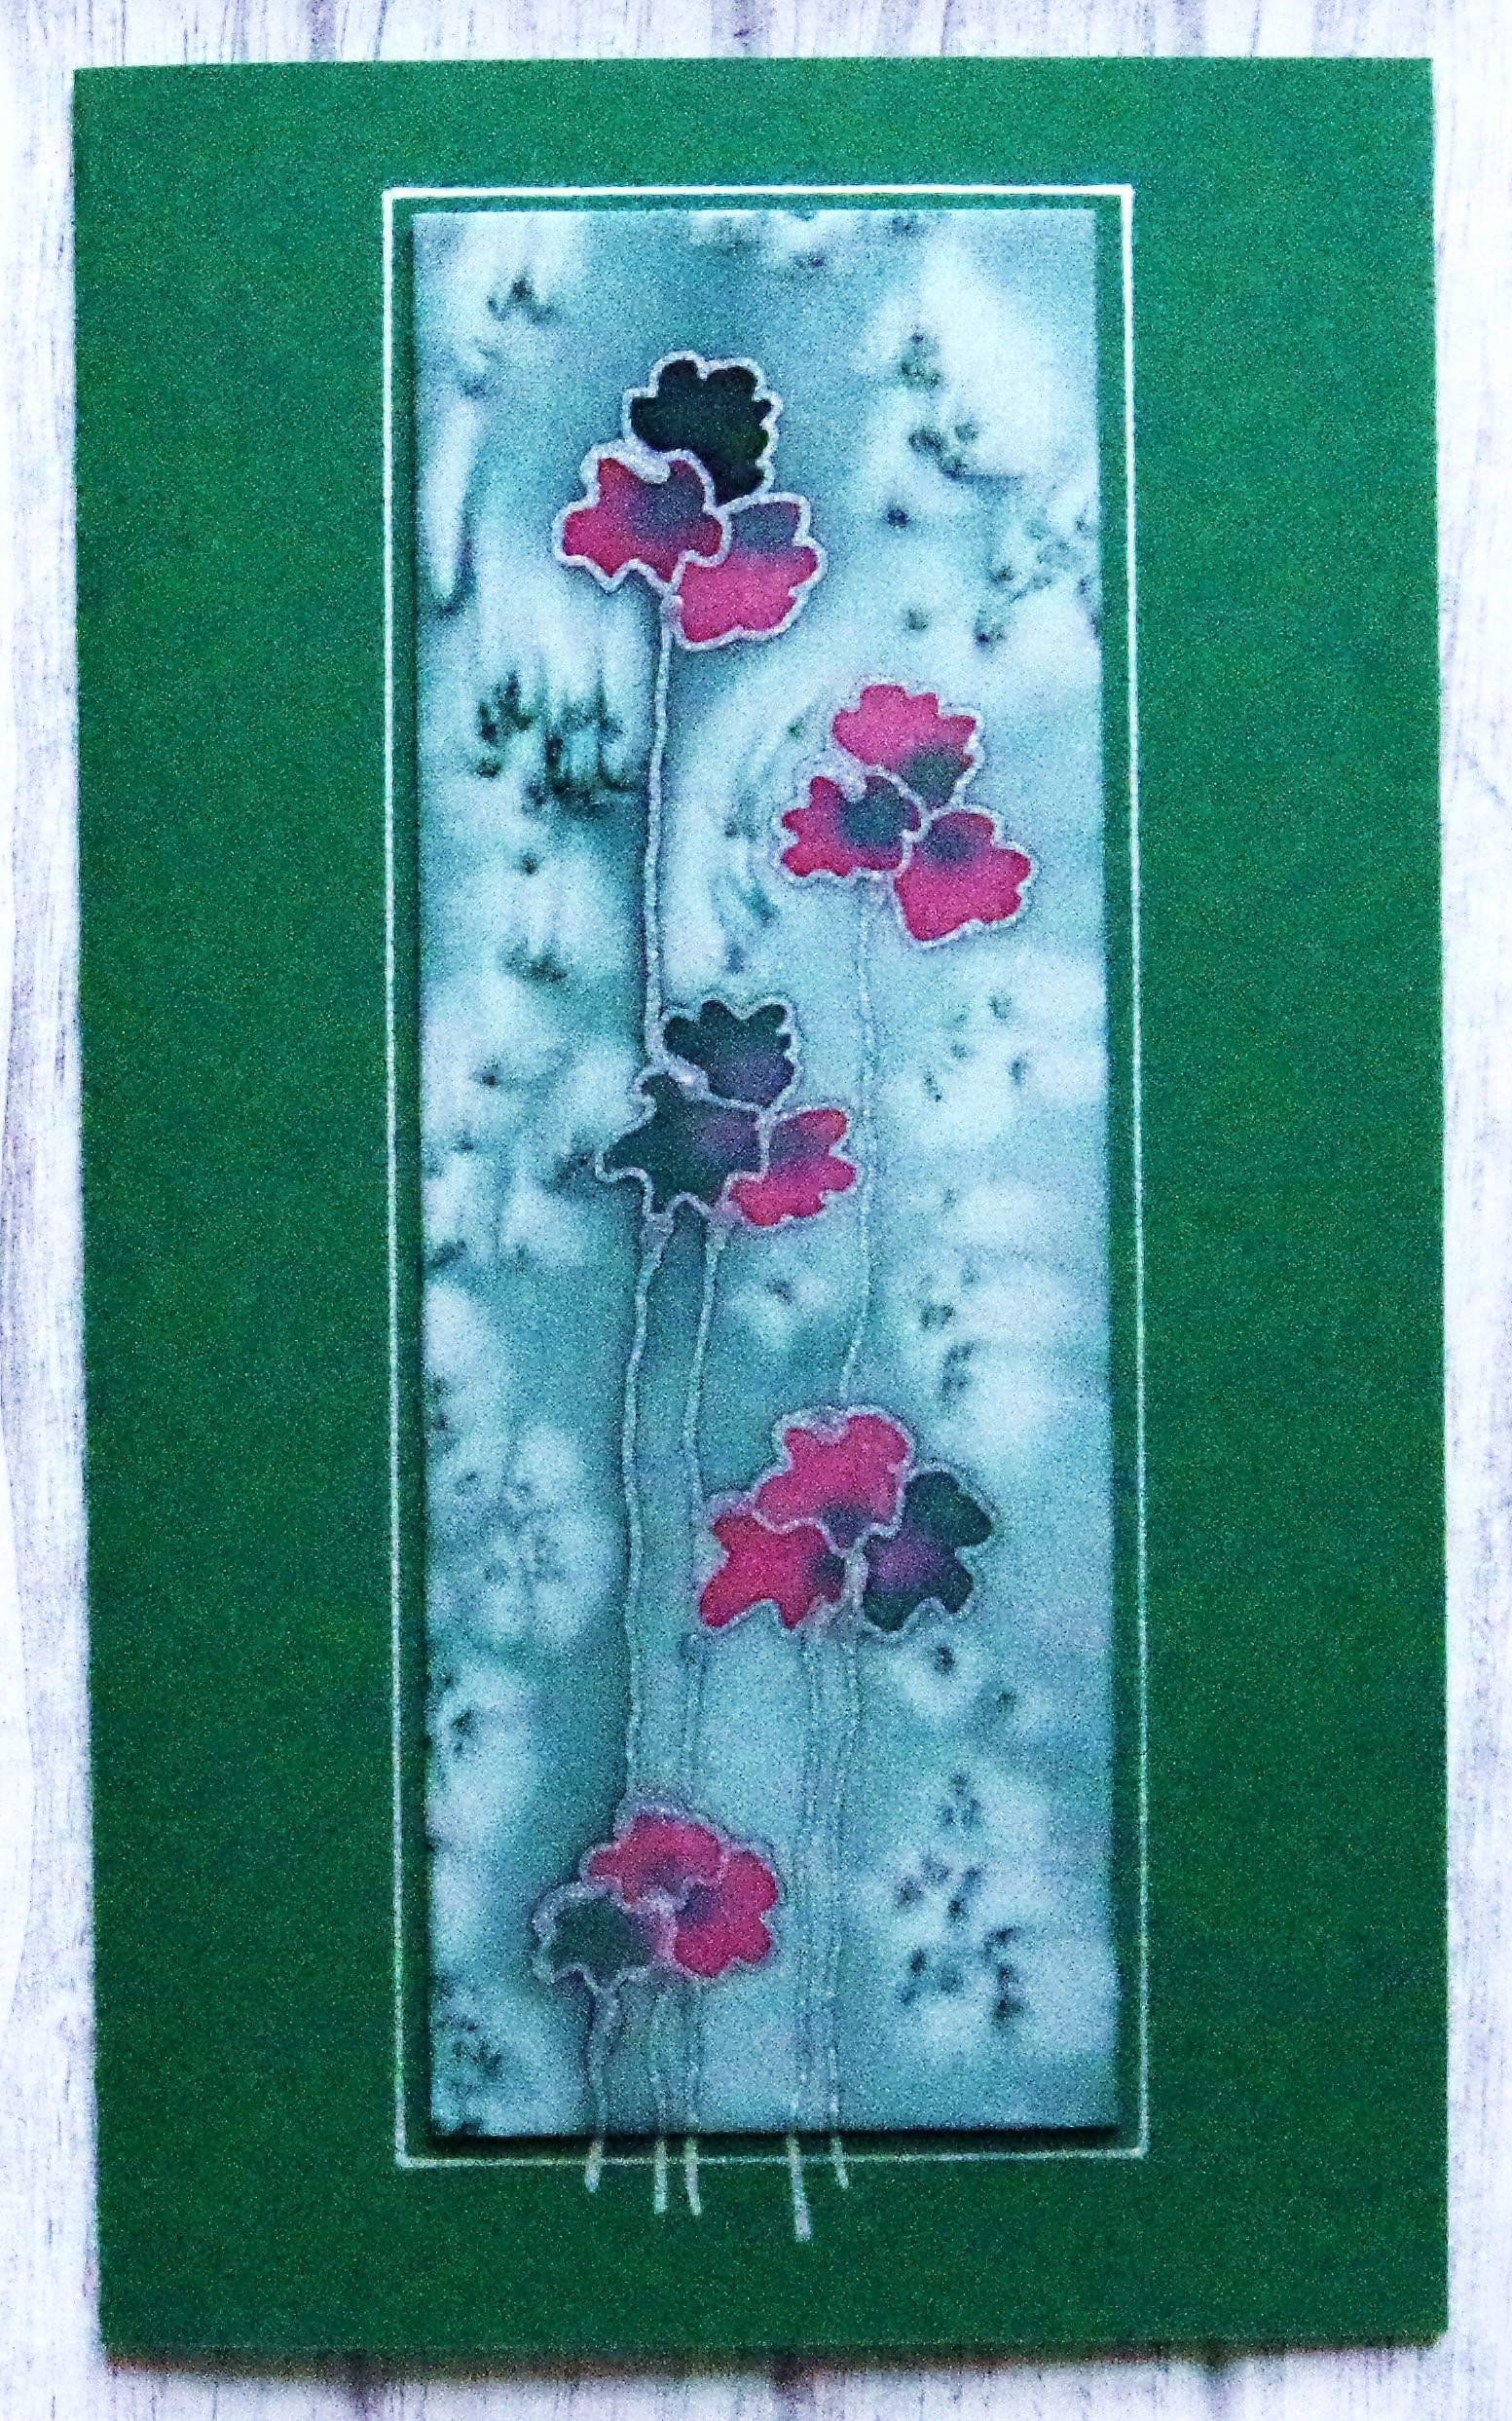 Silk painting. No text.